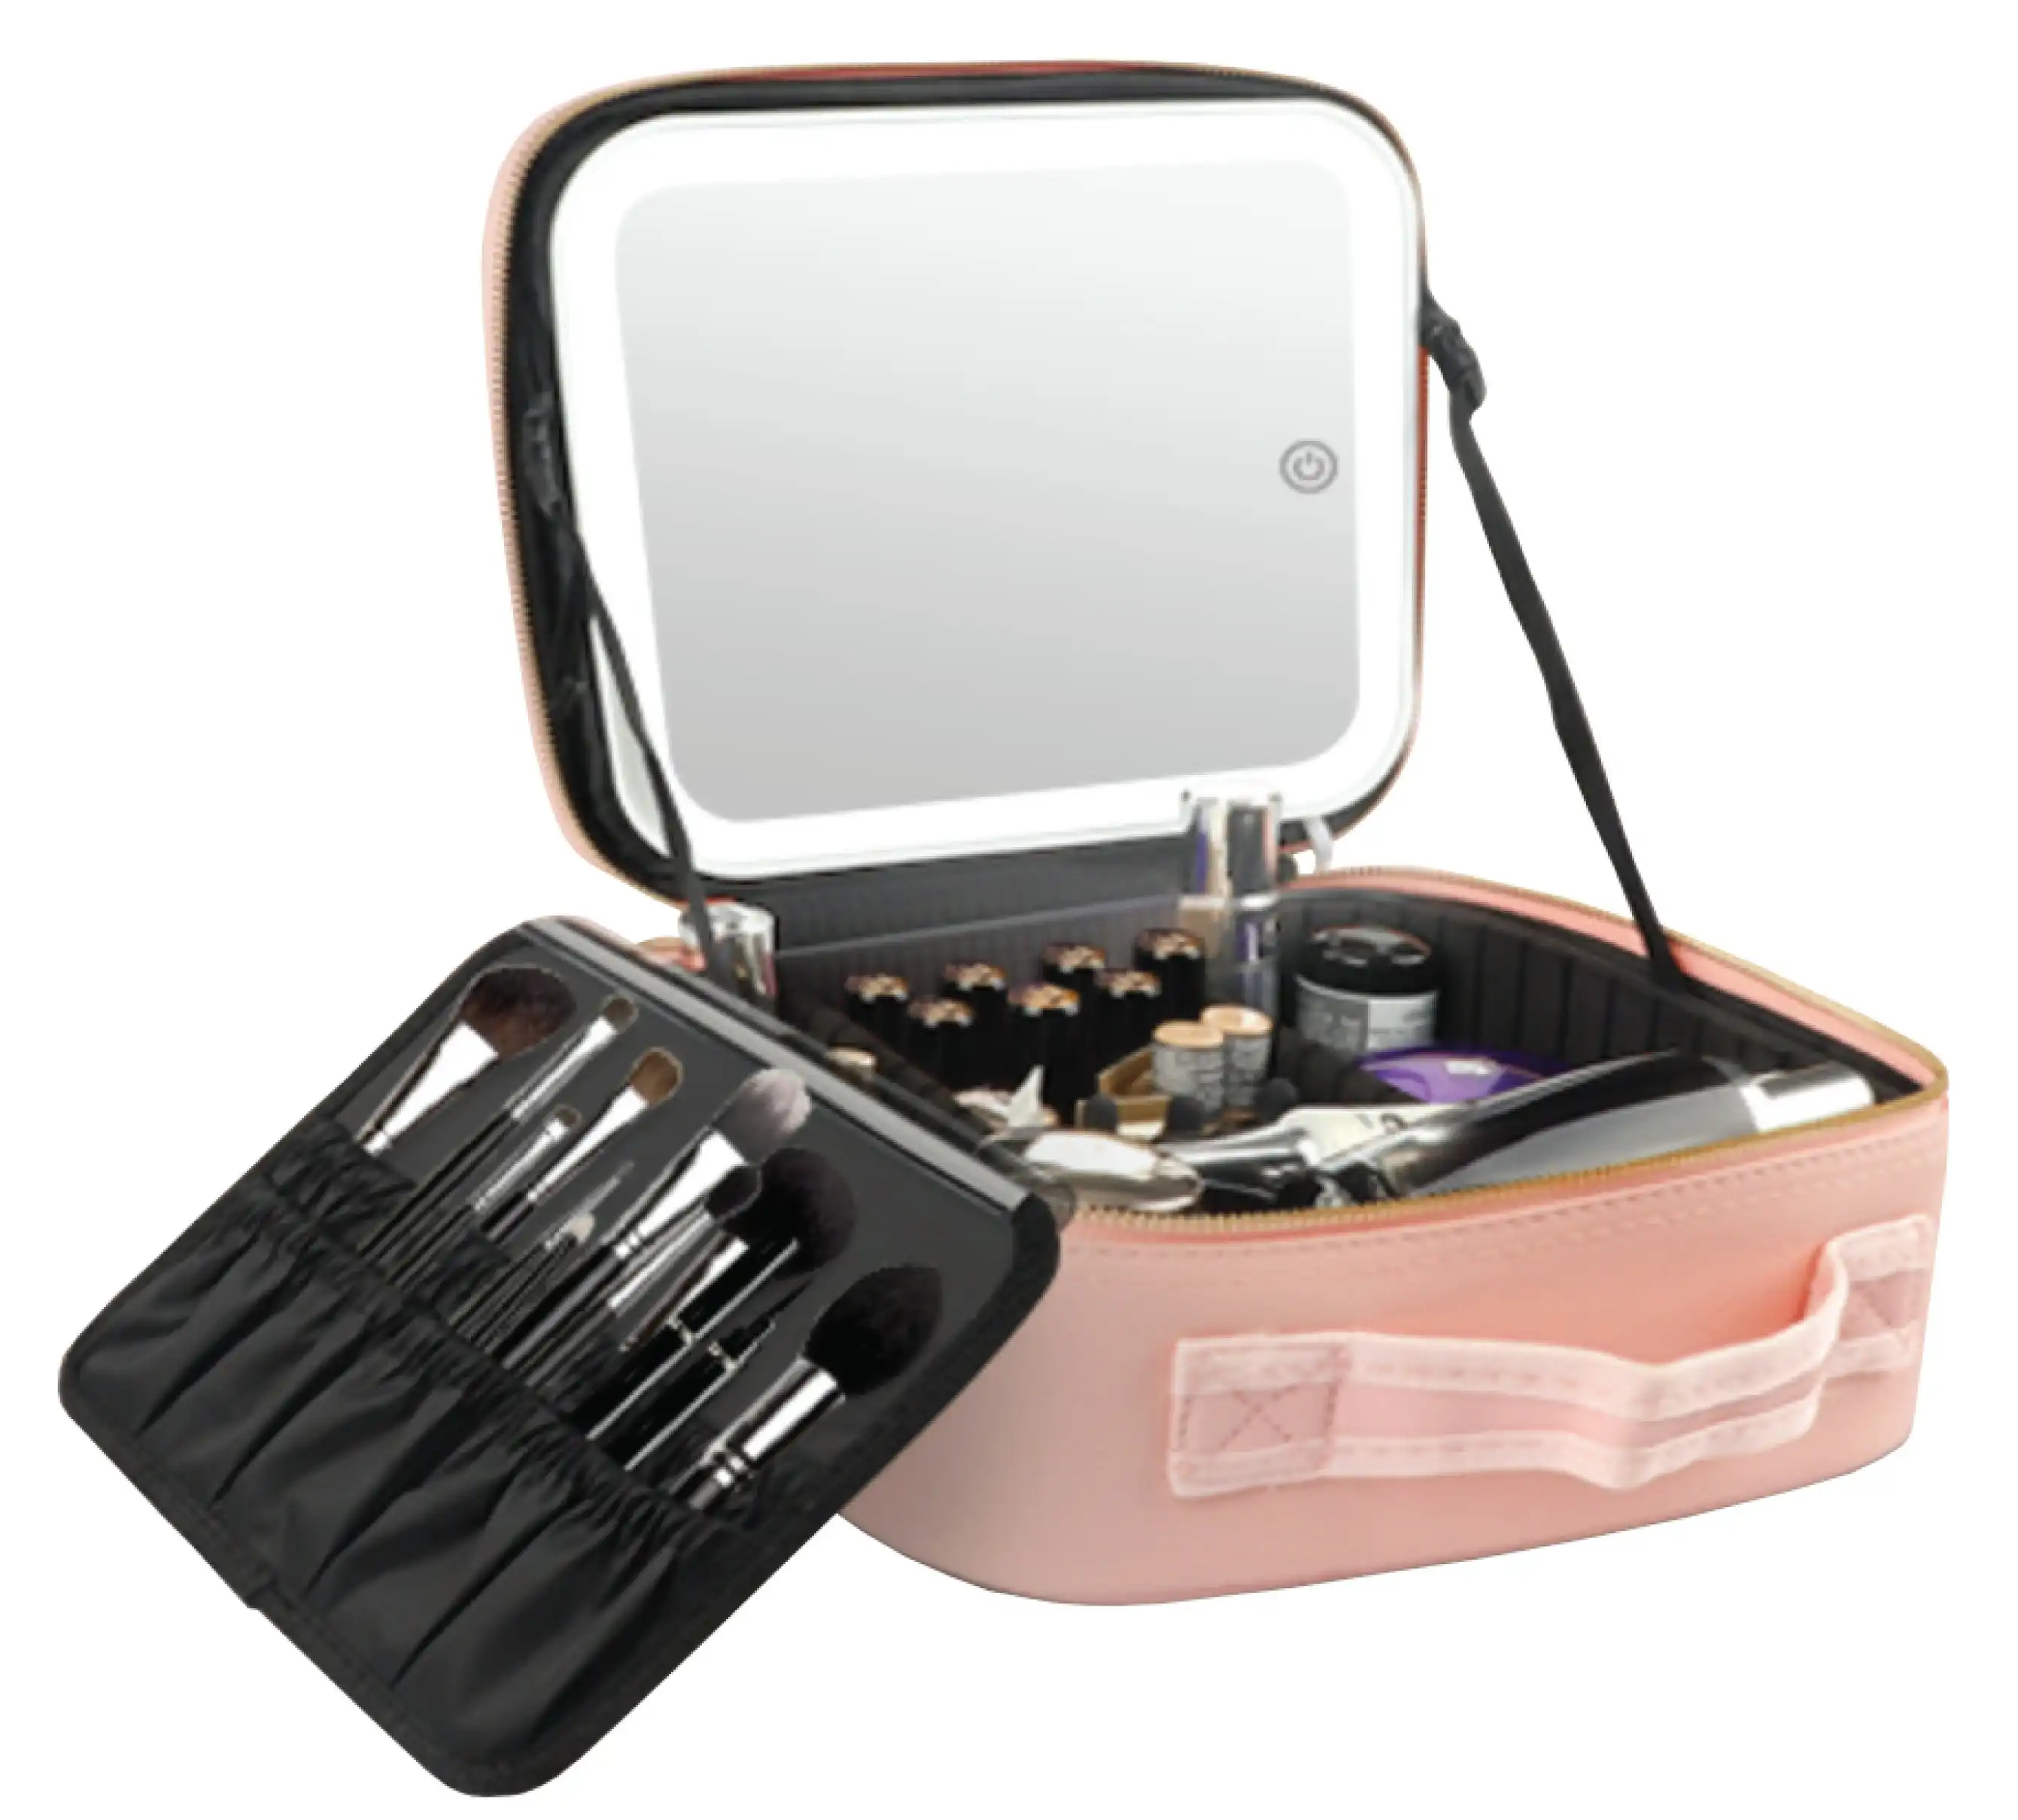 Impressions Cosmetic Bag With Mirror Pink - featuring built-in LED lighting